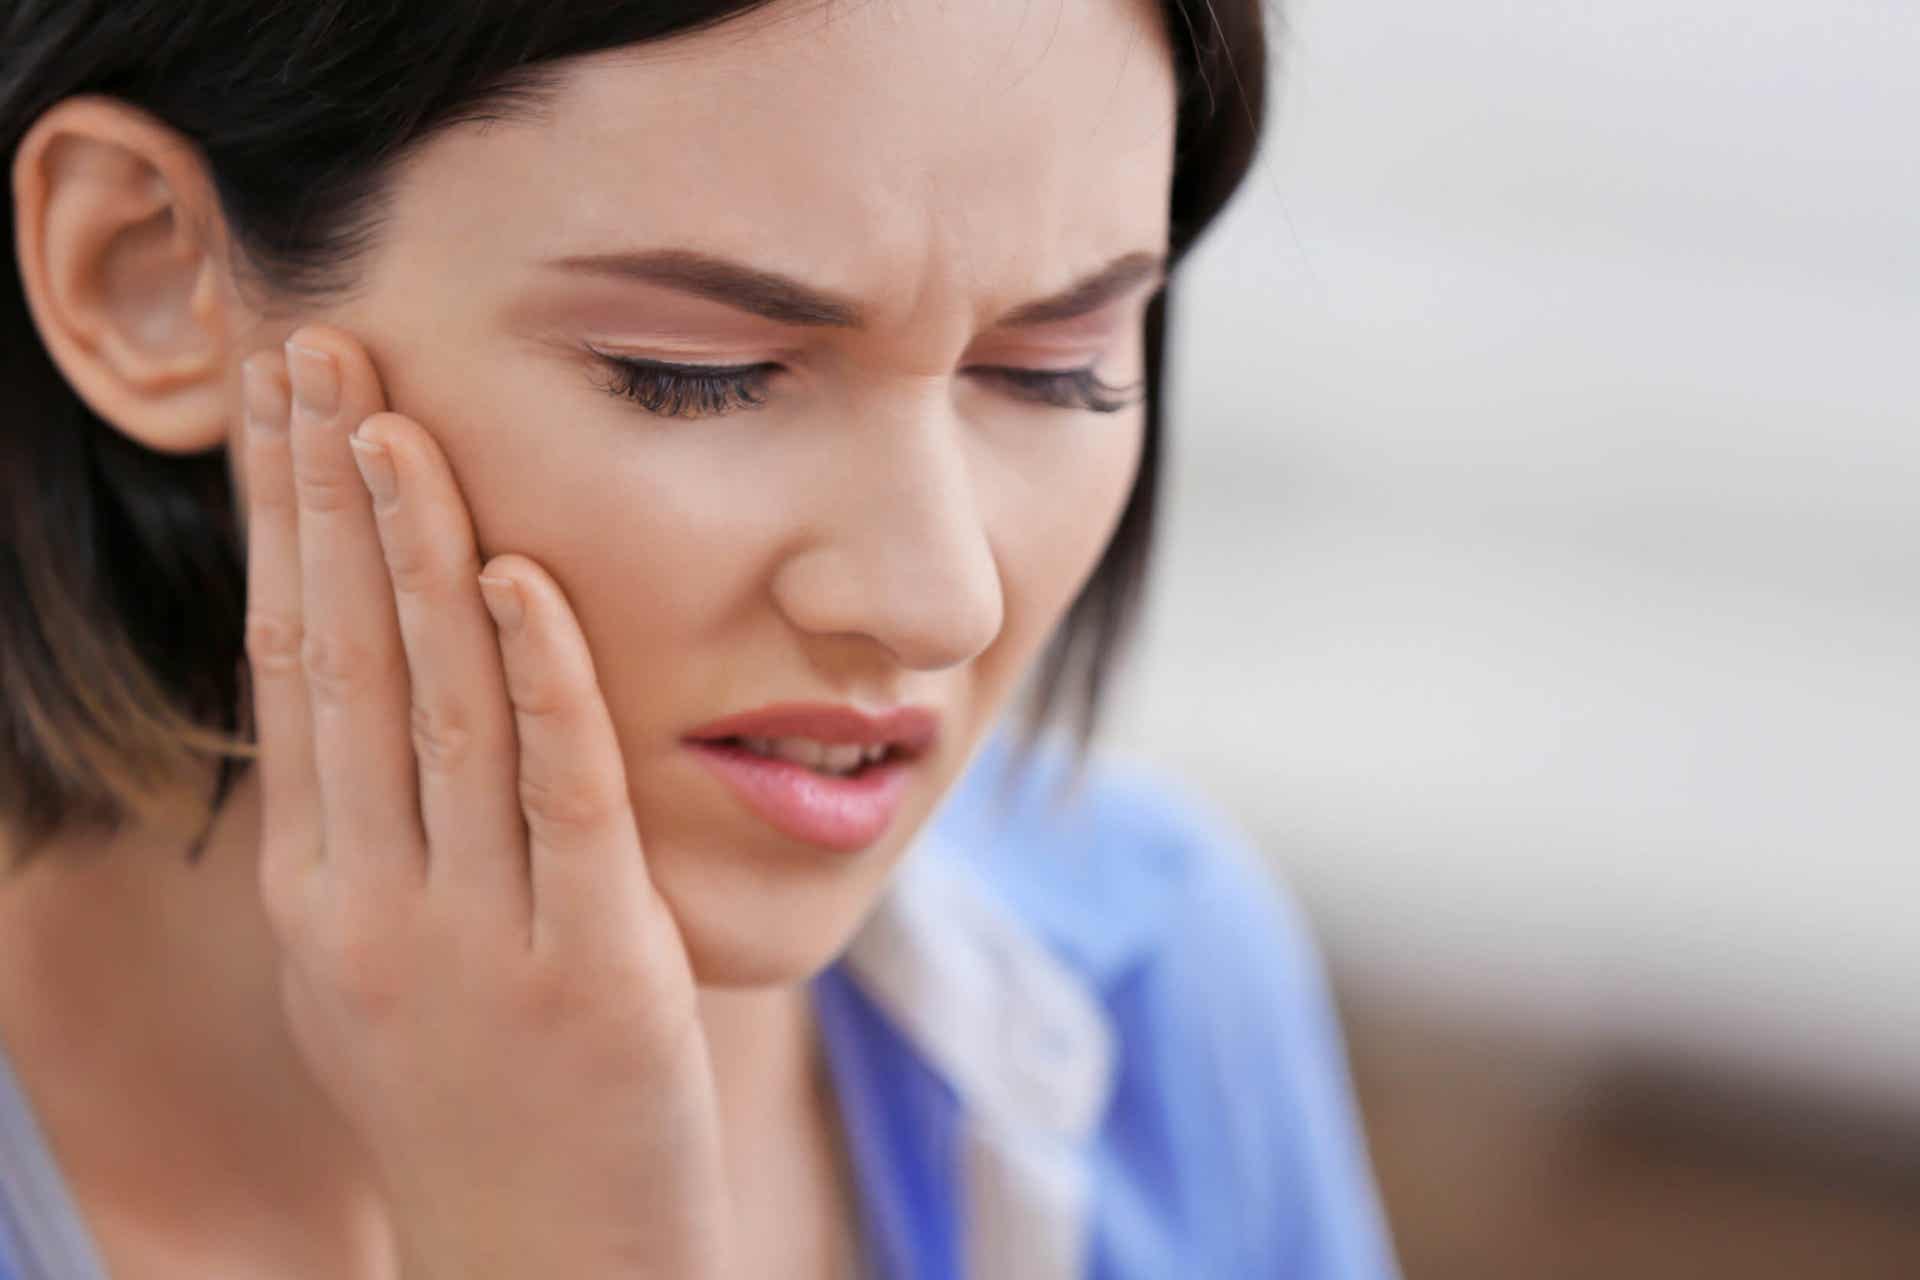 Prickly ash can treat toothache.